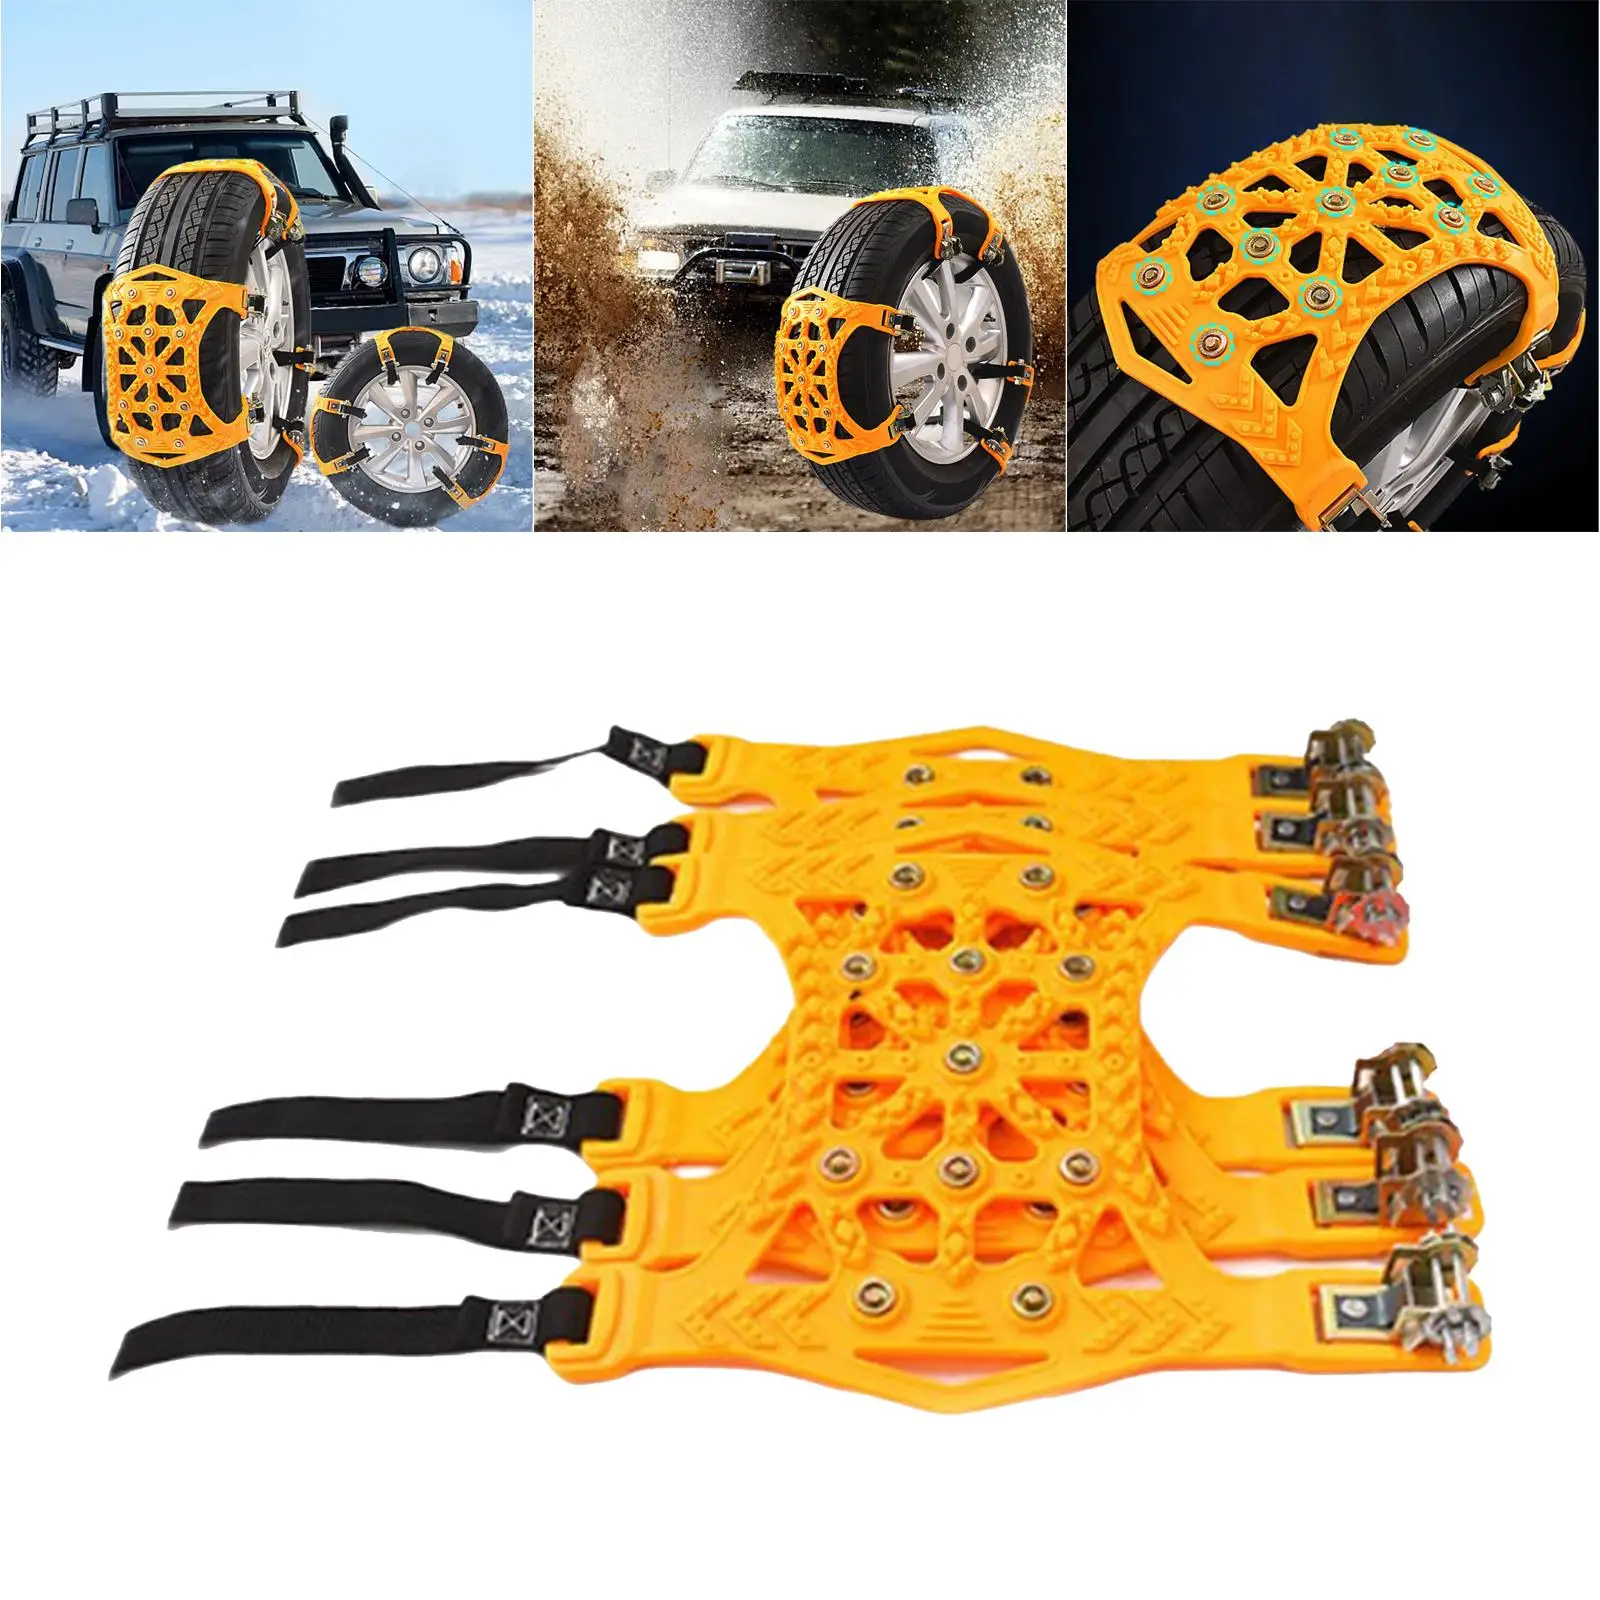 Set of 3Pcs Snow Chains Accessories  Belt for Muddy  Winter Driving Emergency Wheel 